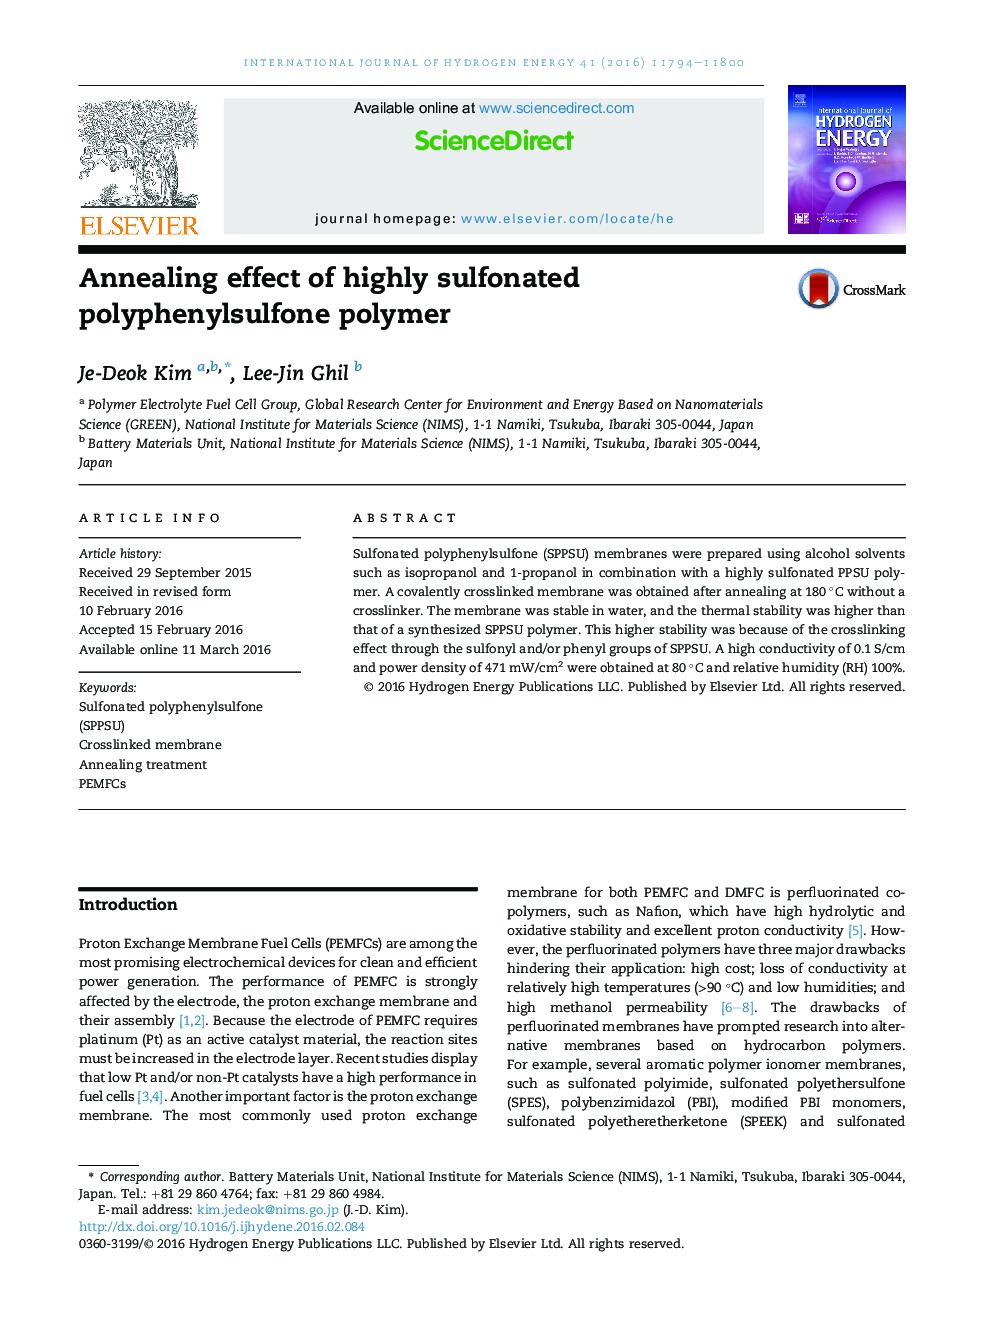 Annealing effect of highly sulfonated polyphenylsulfone polymer